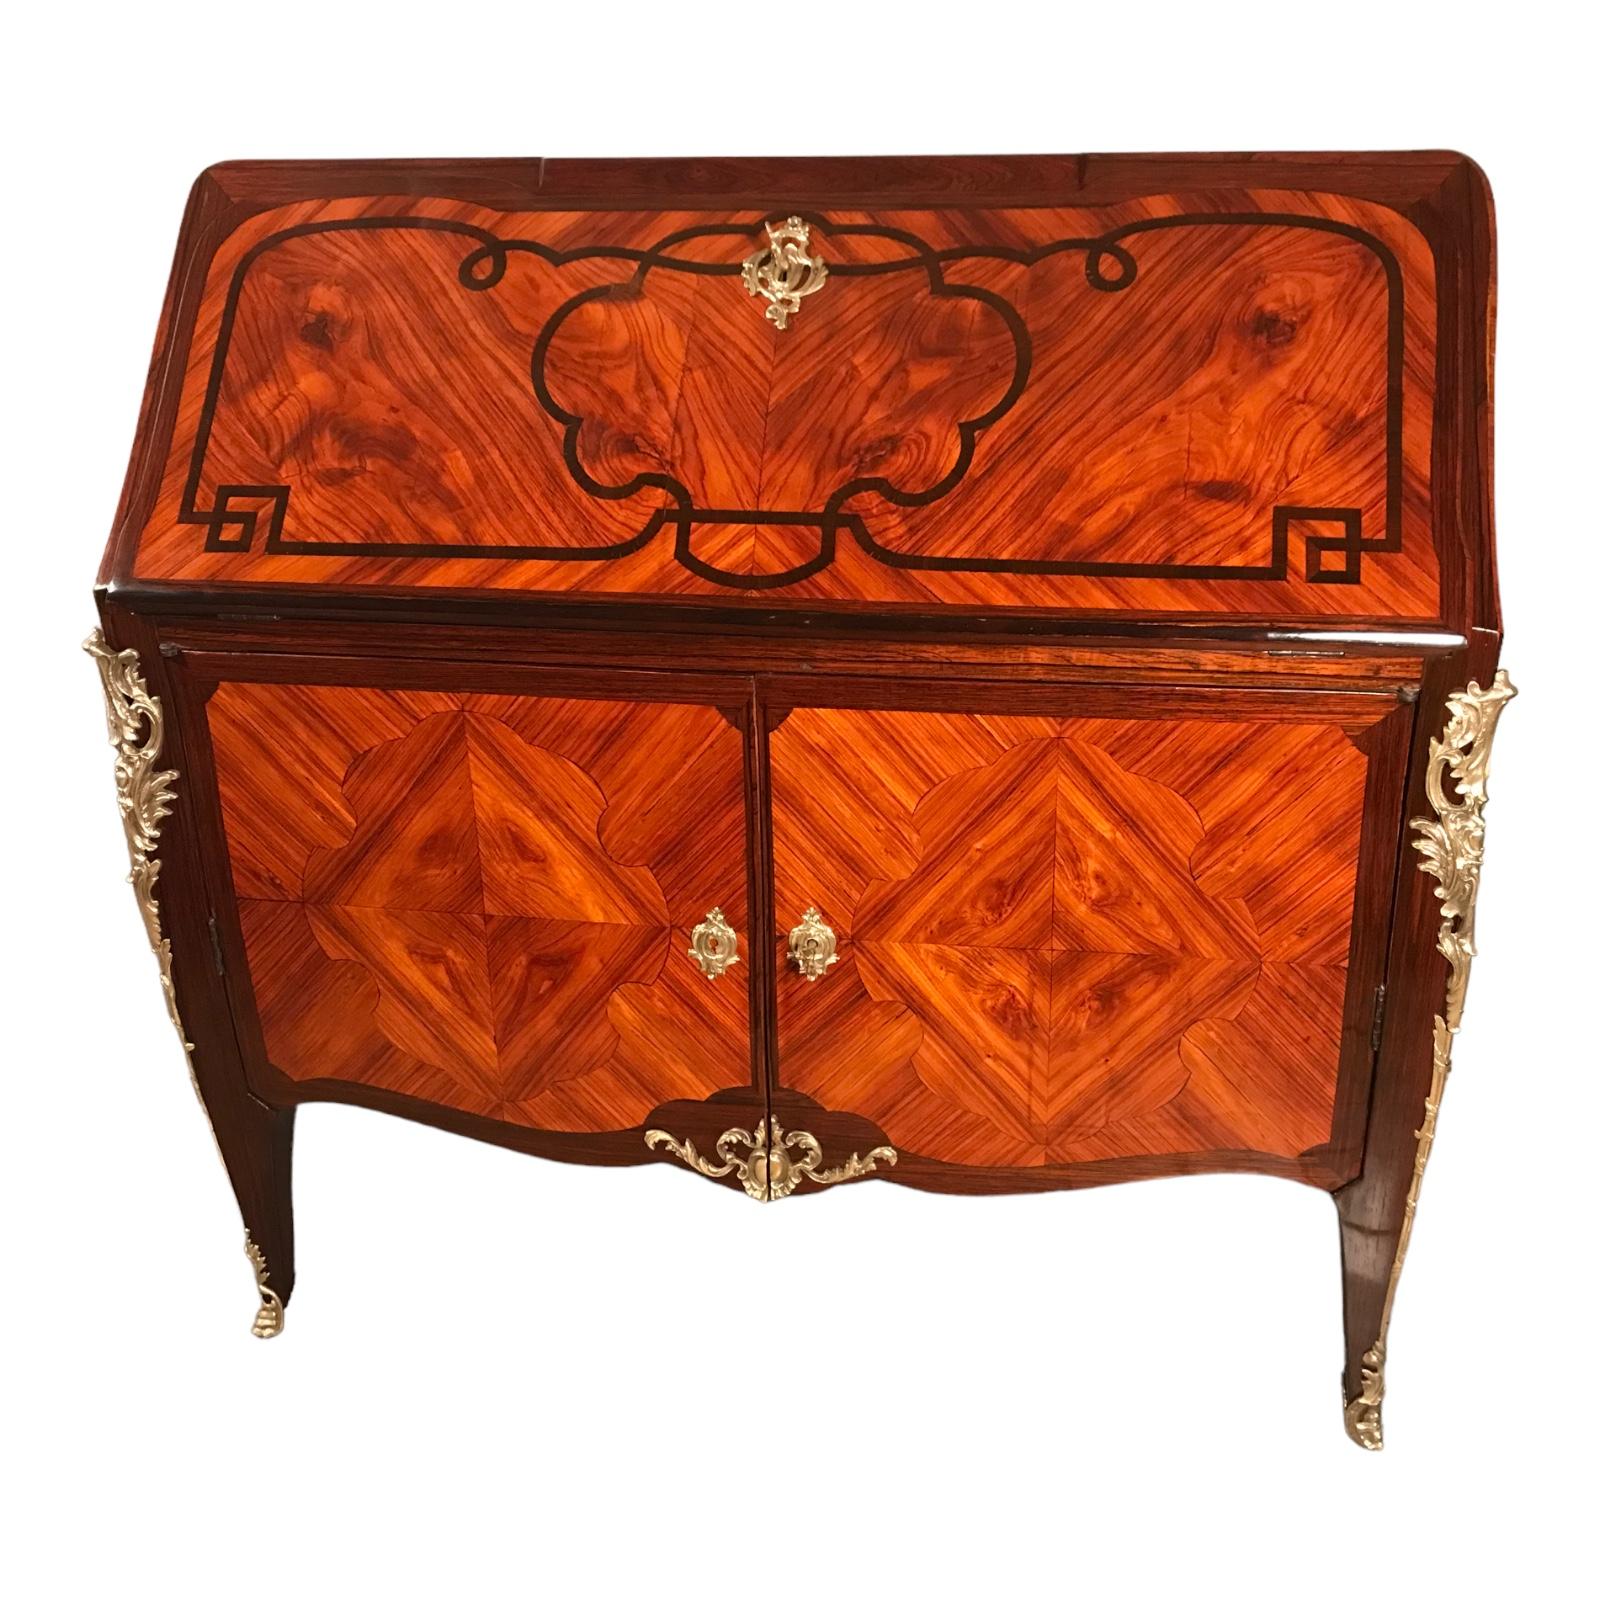 This French Louis XV secretary desk dates back to around 1760 and comes from Paris. This exquisite piece stands out for its beautiful kingwood veneer and marquetry on an oak carcass. The secretaire with a serpentine shaped front stands on four